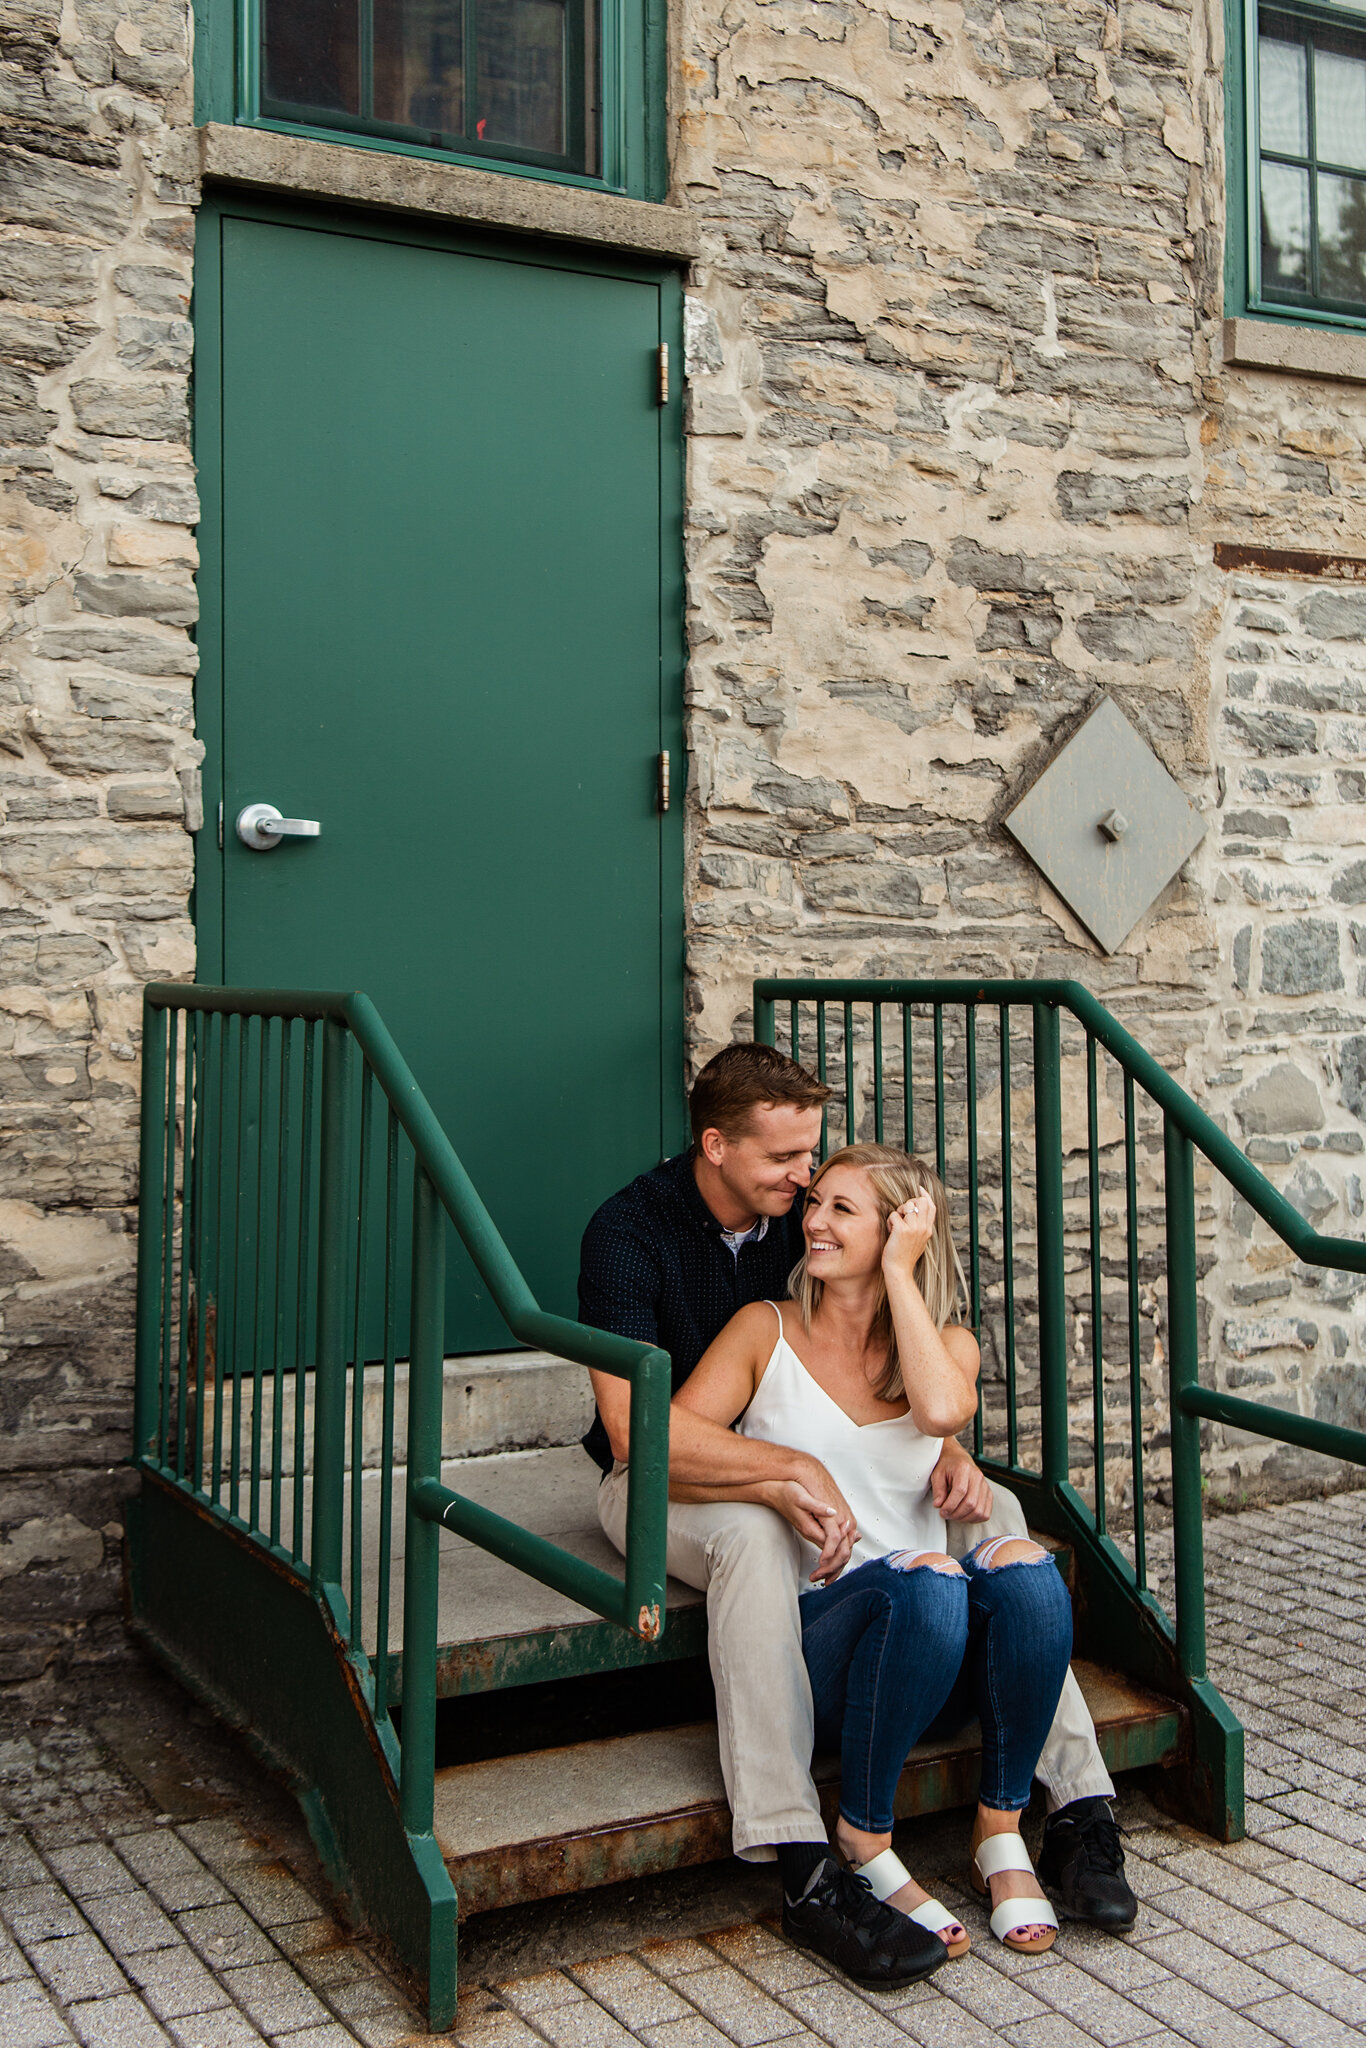 Genesee_Brew_House_High_Falls_Rochester_Engagement_Session_JILL_STUDIO_Rochester_NY_Photographer_5627.jpg